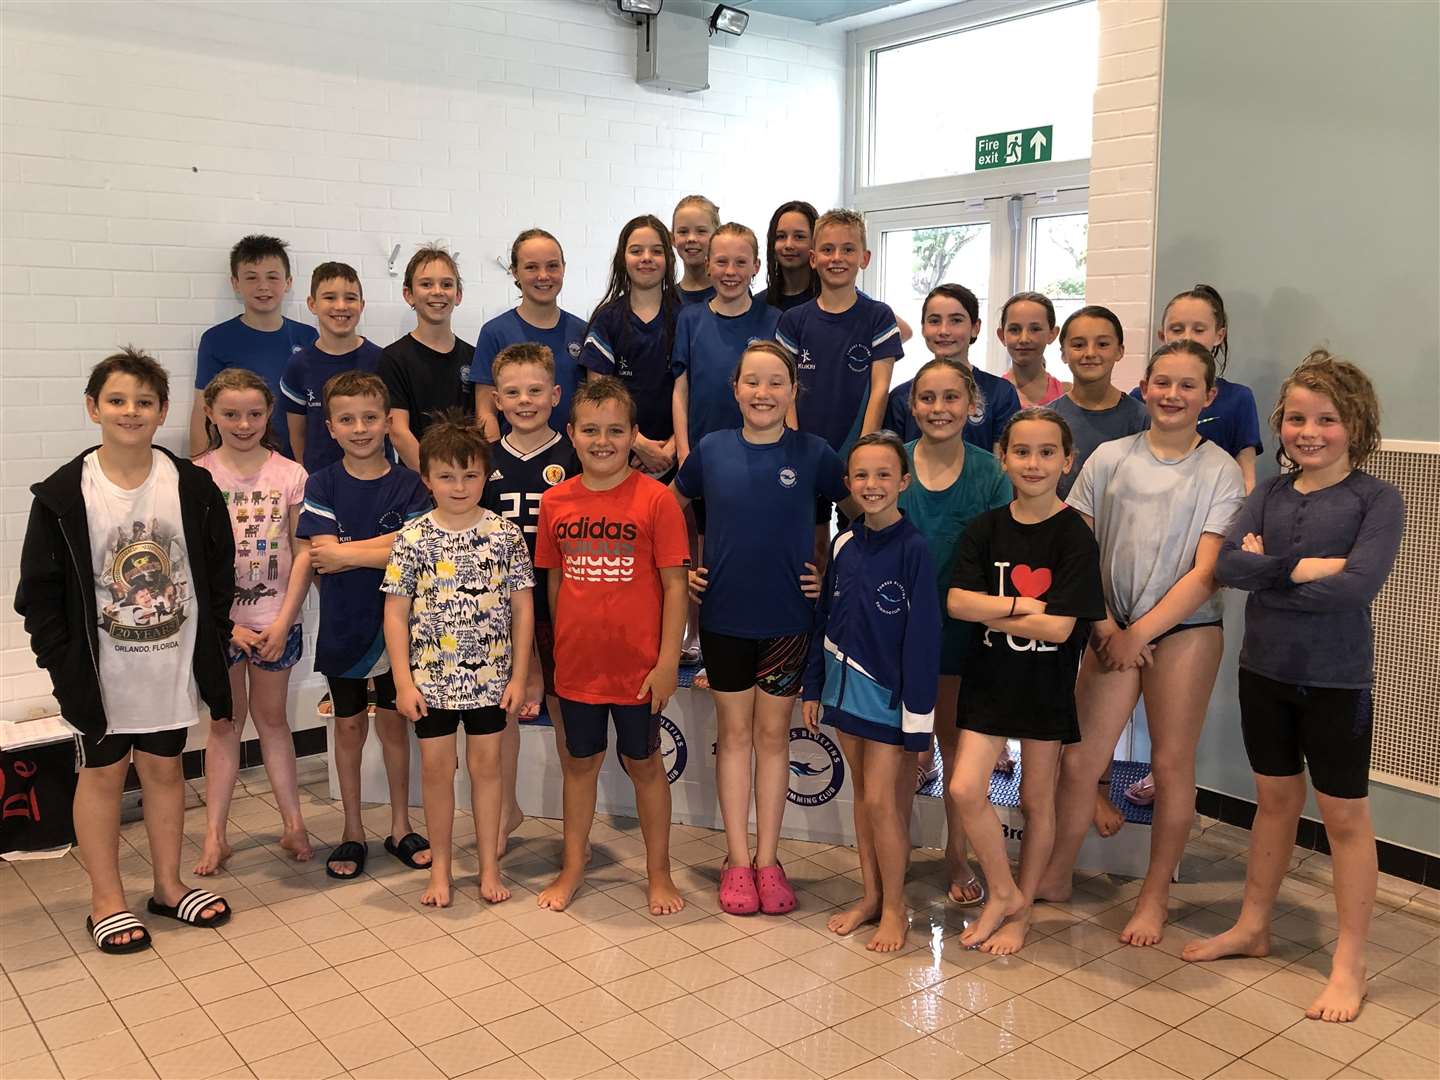 Bluefins who took part in the recent mini-meet competition at Forres swimming pool.